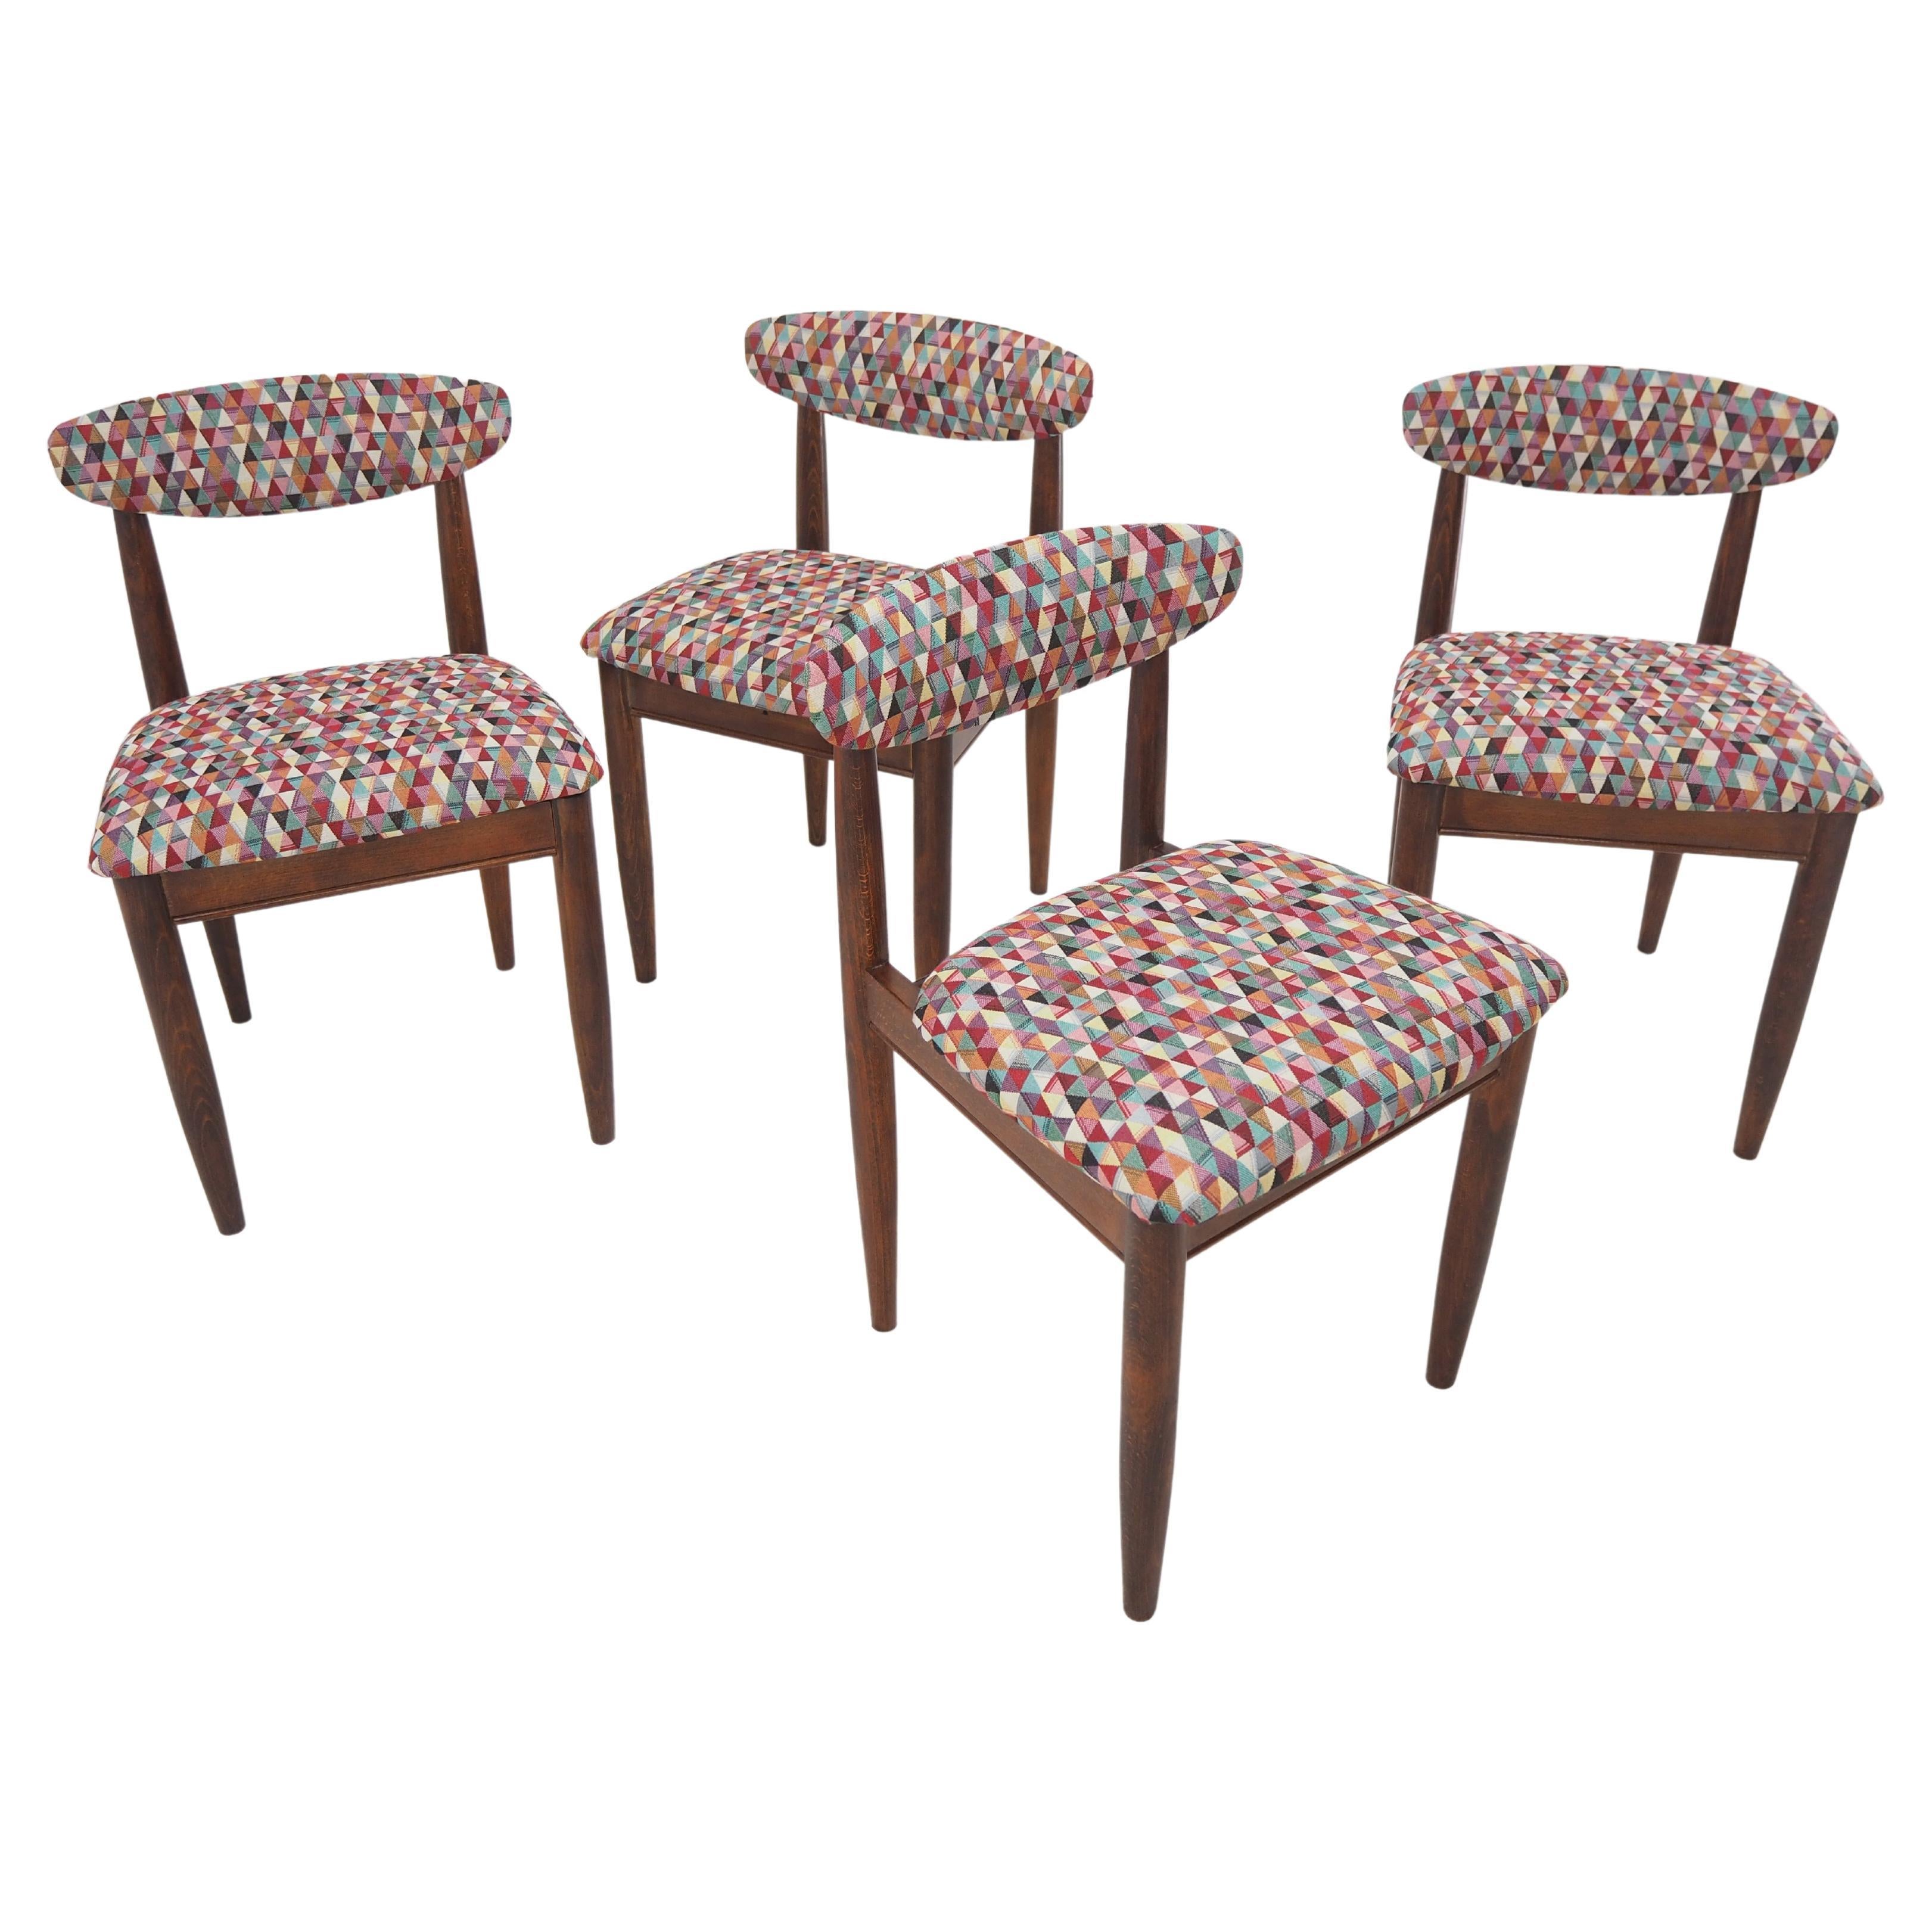 Set of Four Midcentury Dining Chairs, Czechoslovakia, 1960s